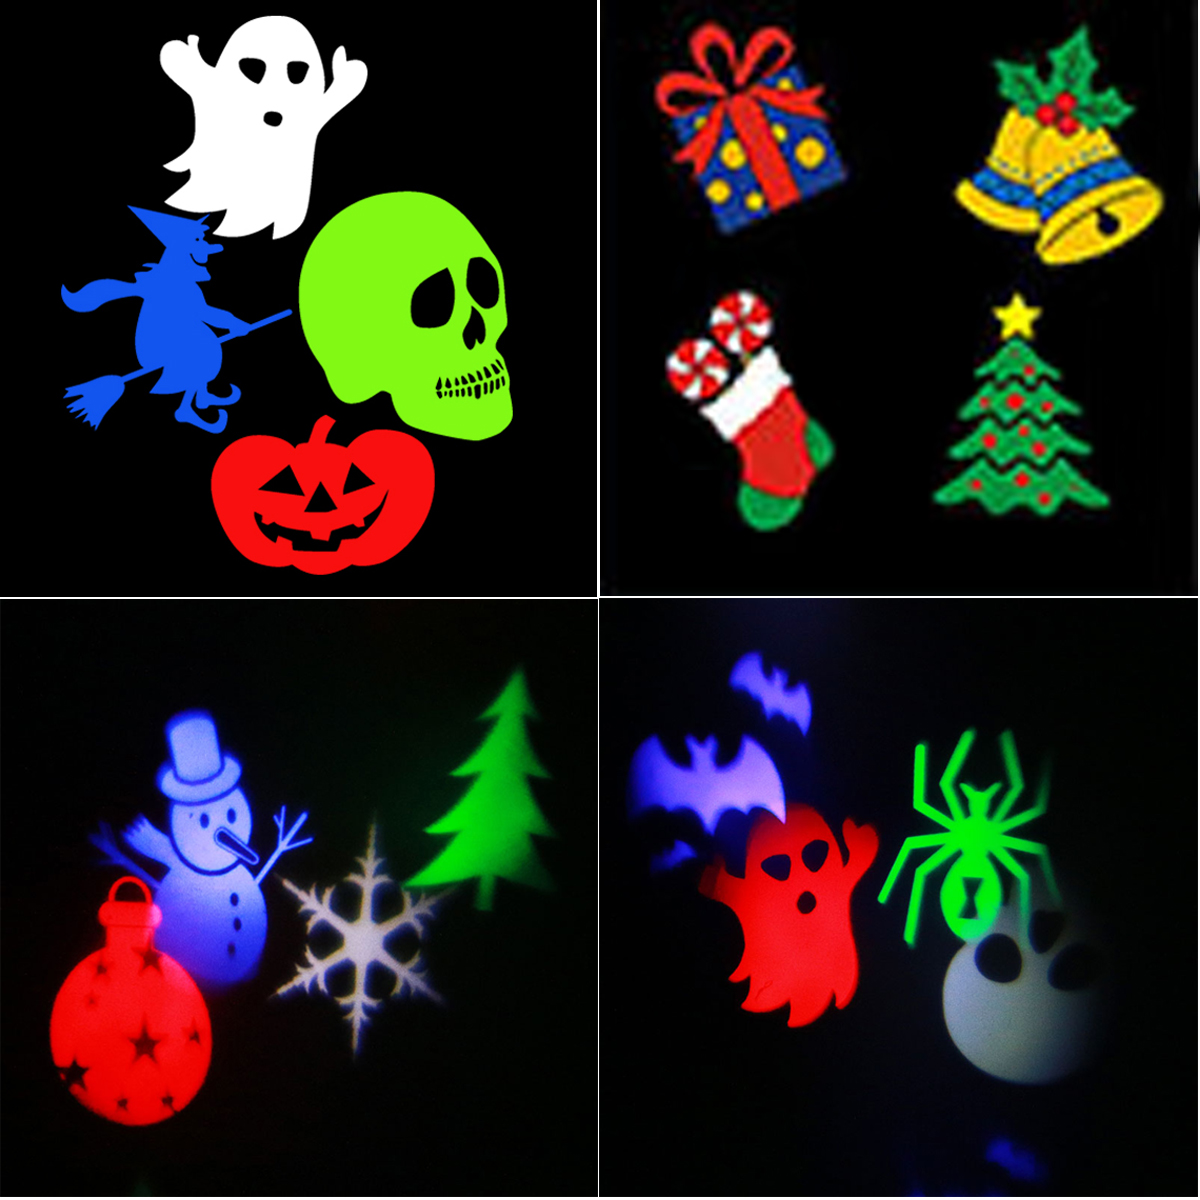 6-Patterns-4W-LED-Stage-Light-Projector-Lamp-Landscape-Garden-Decor-for-Halloween-Christmas-Decorati-1193828-10